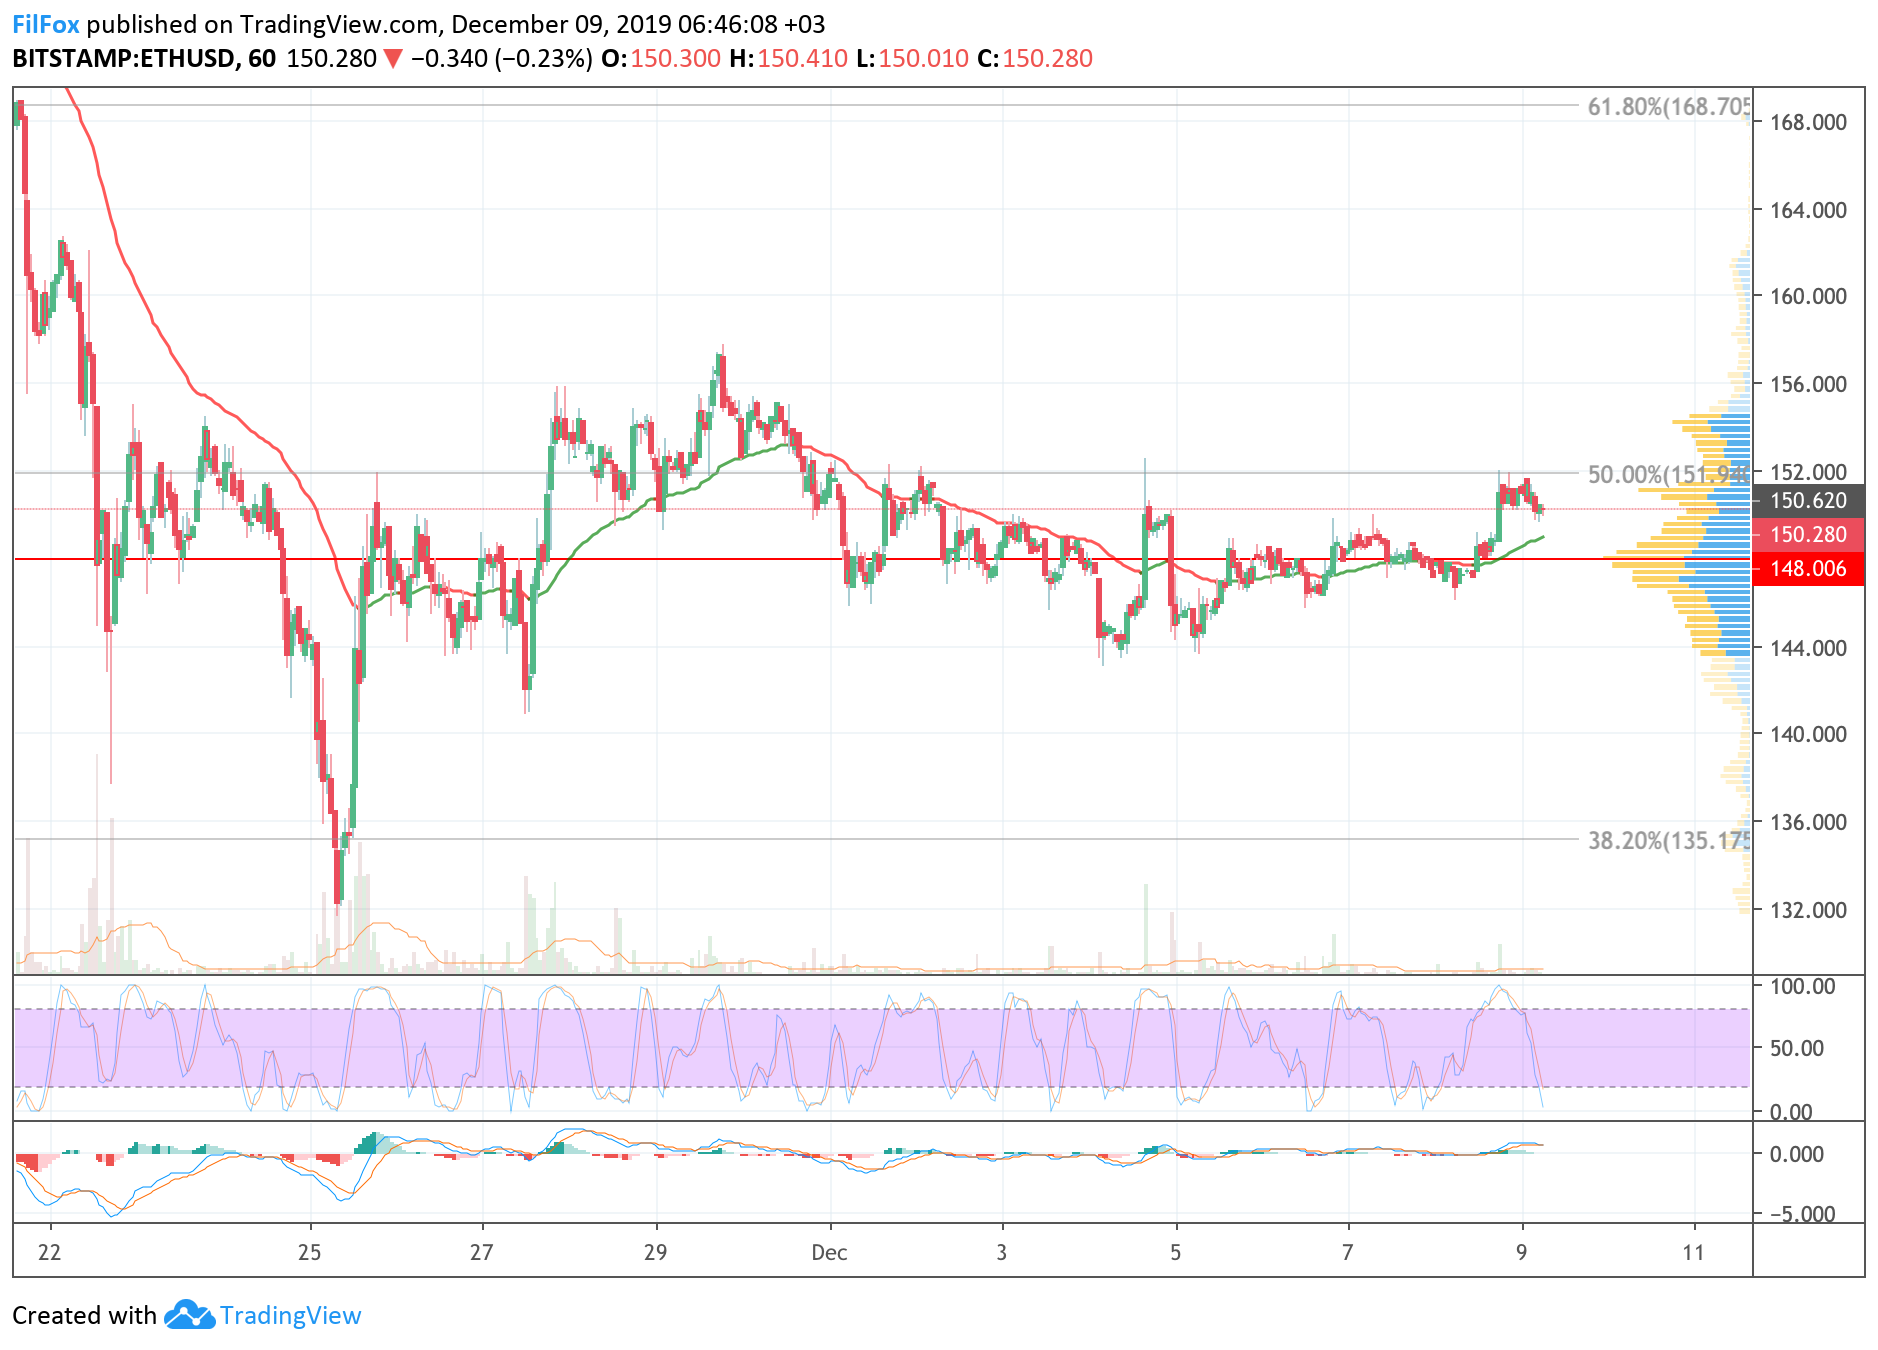 Analysis of cryptocurrency pairs BTC / USD, ETH / USD and XRP / USD on 12/9/2019